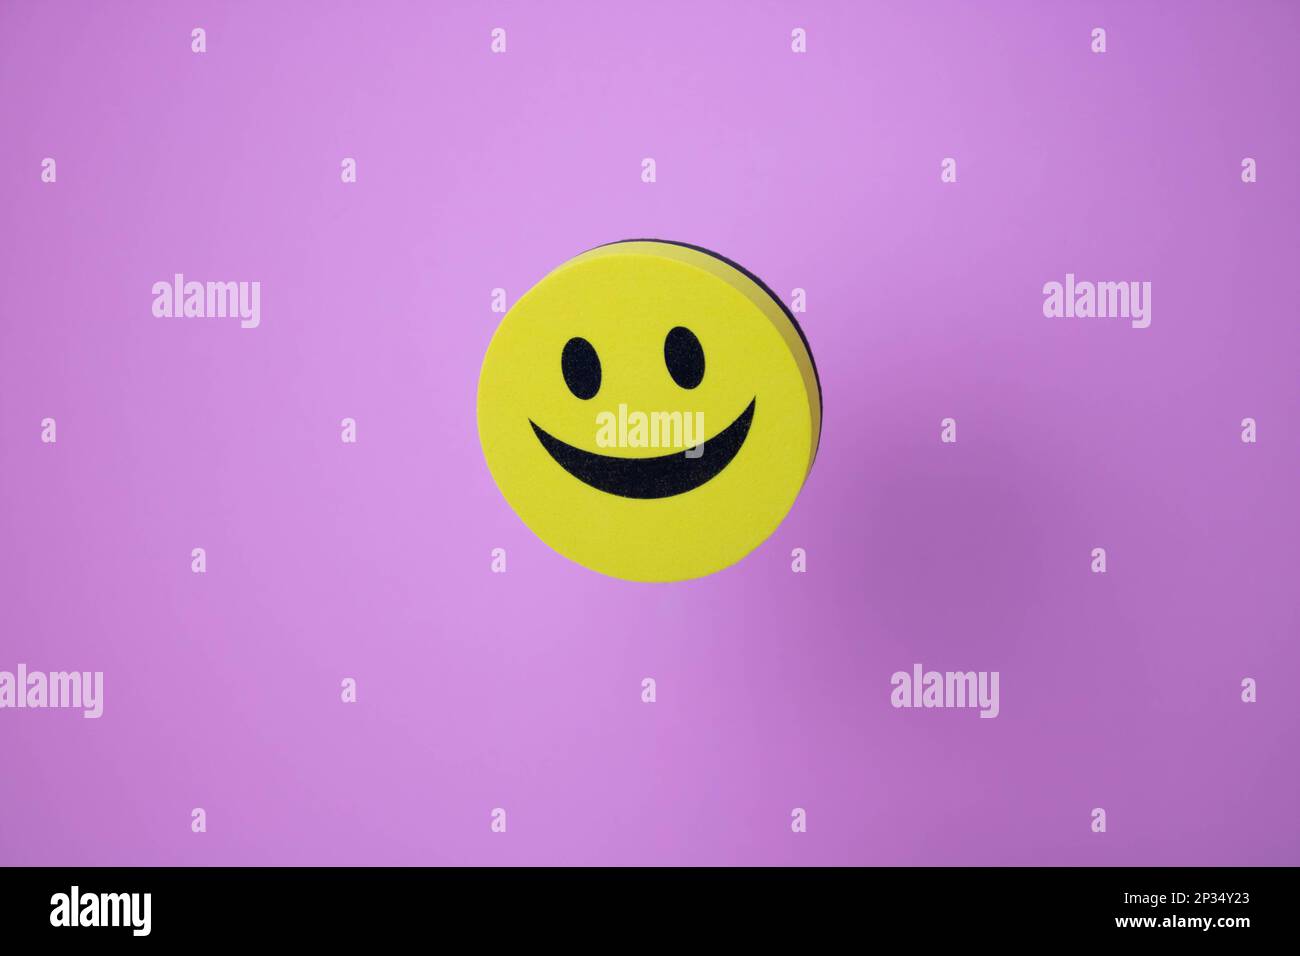 A yellow smiling smiley face and its shadow on a pink background Stock Photo